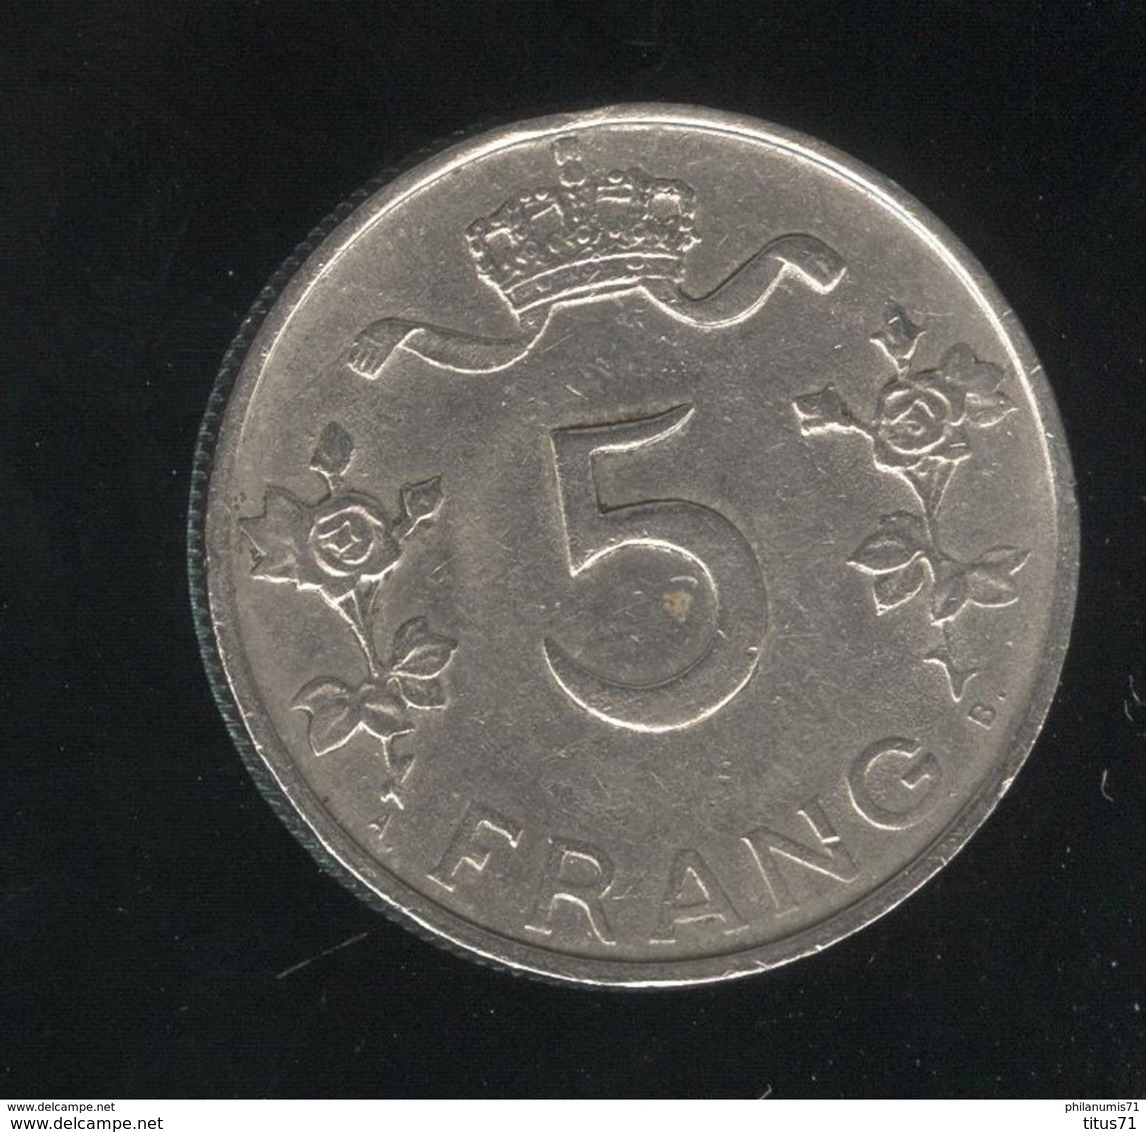 5 Frang Luxembourg 1949 SUP - Luxembourg